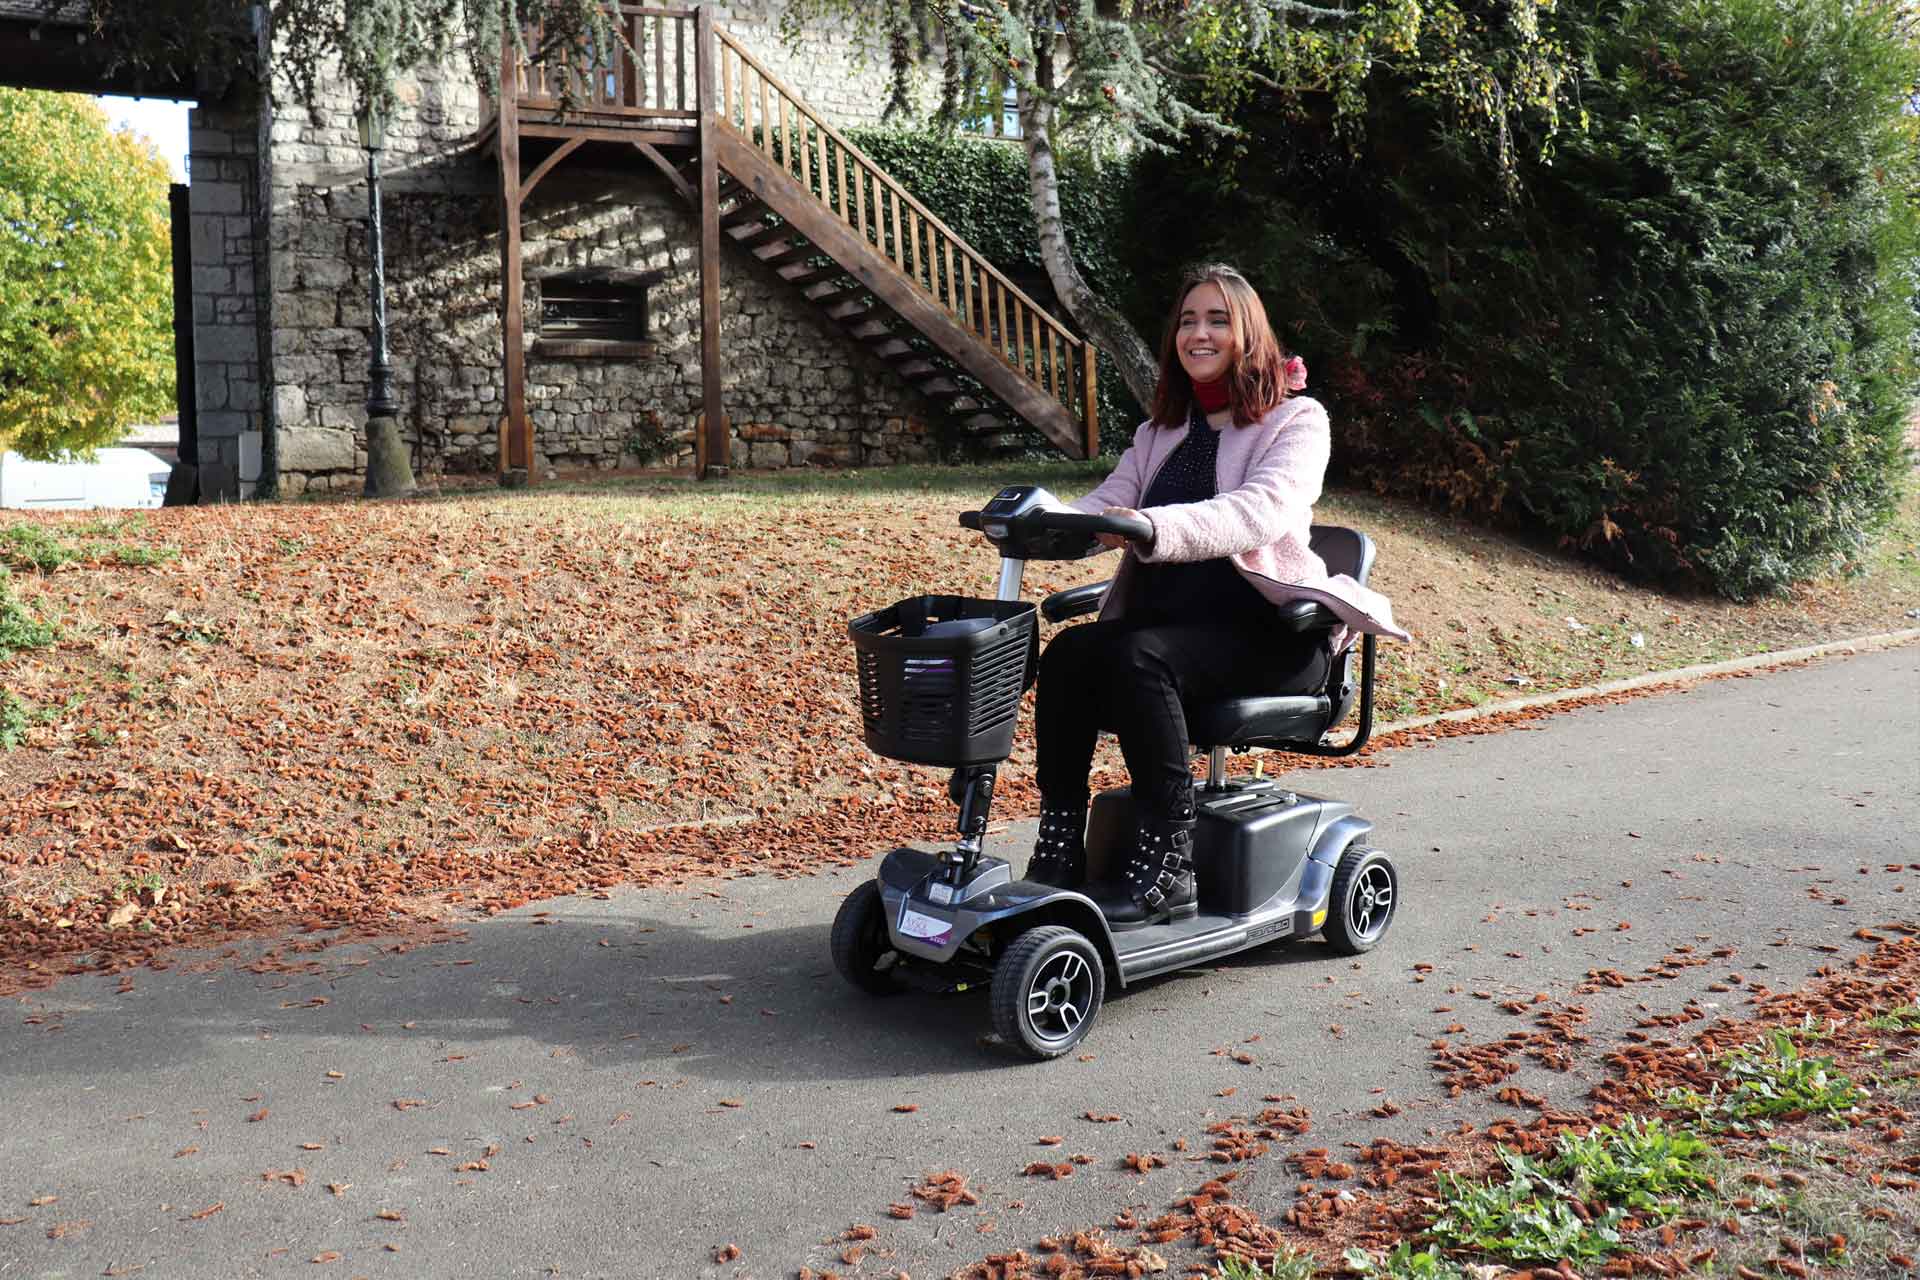 Top 4 Mobility Equipment to rent for your holiday